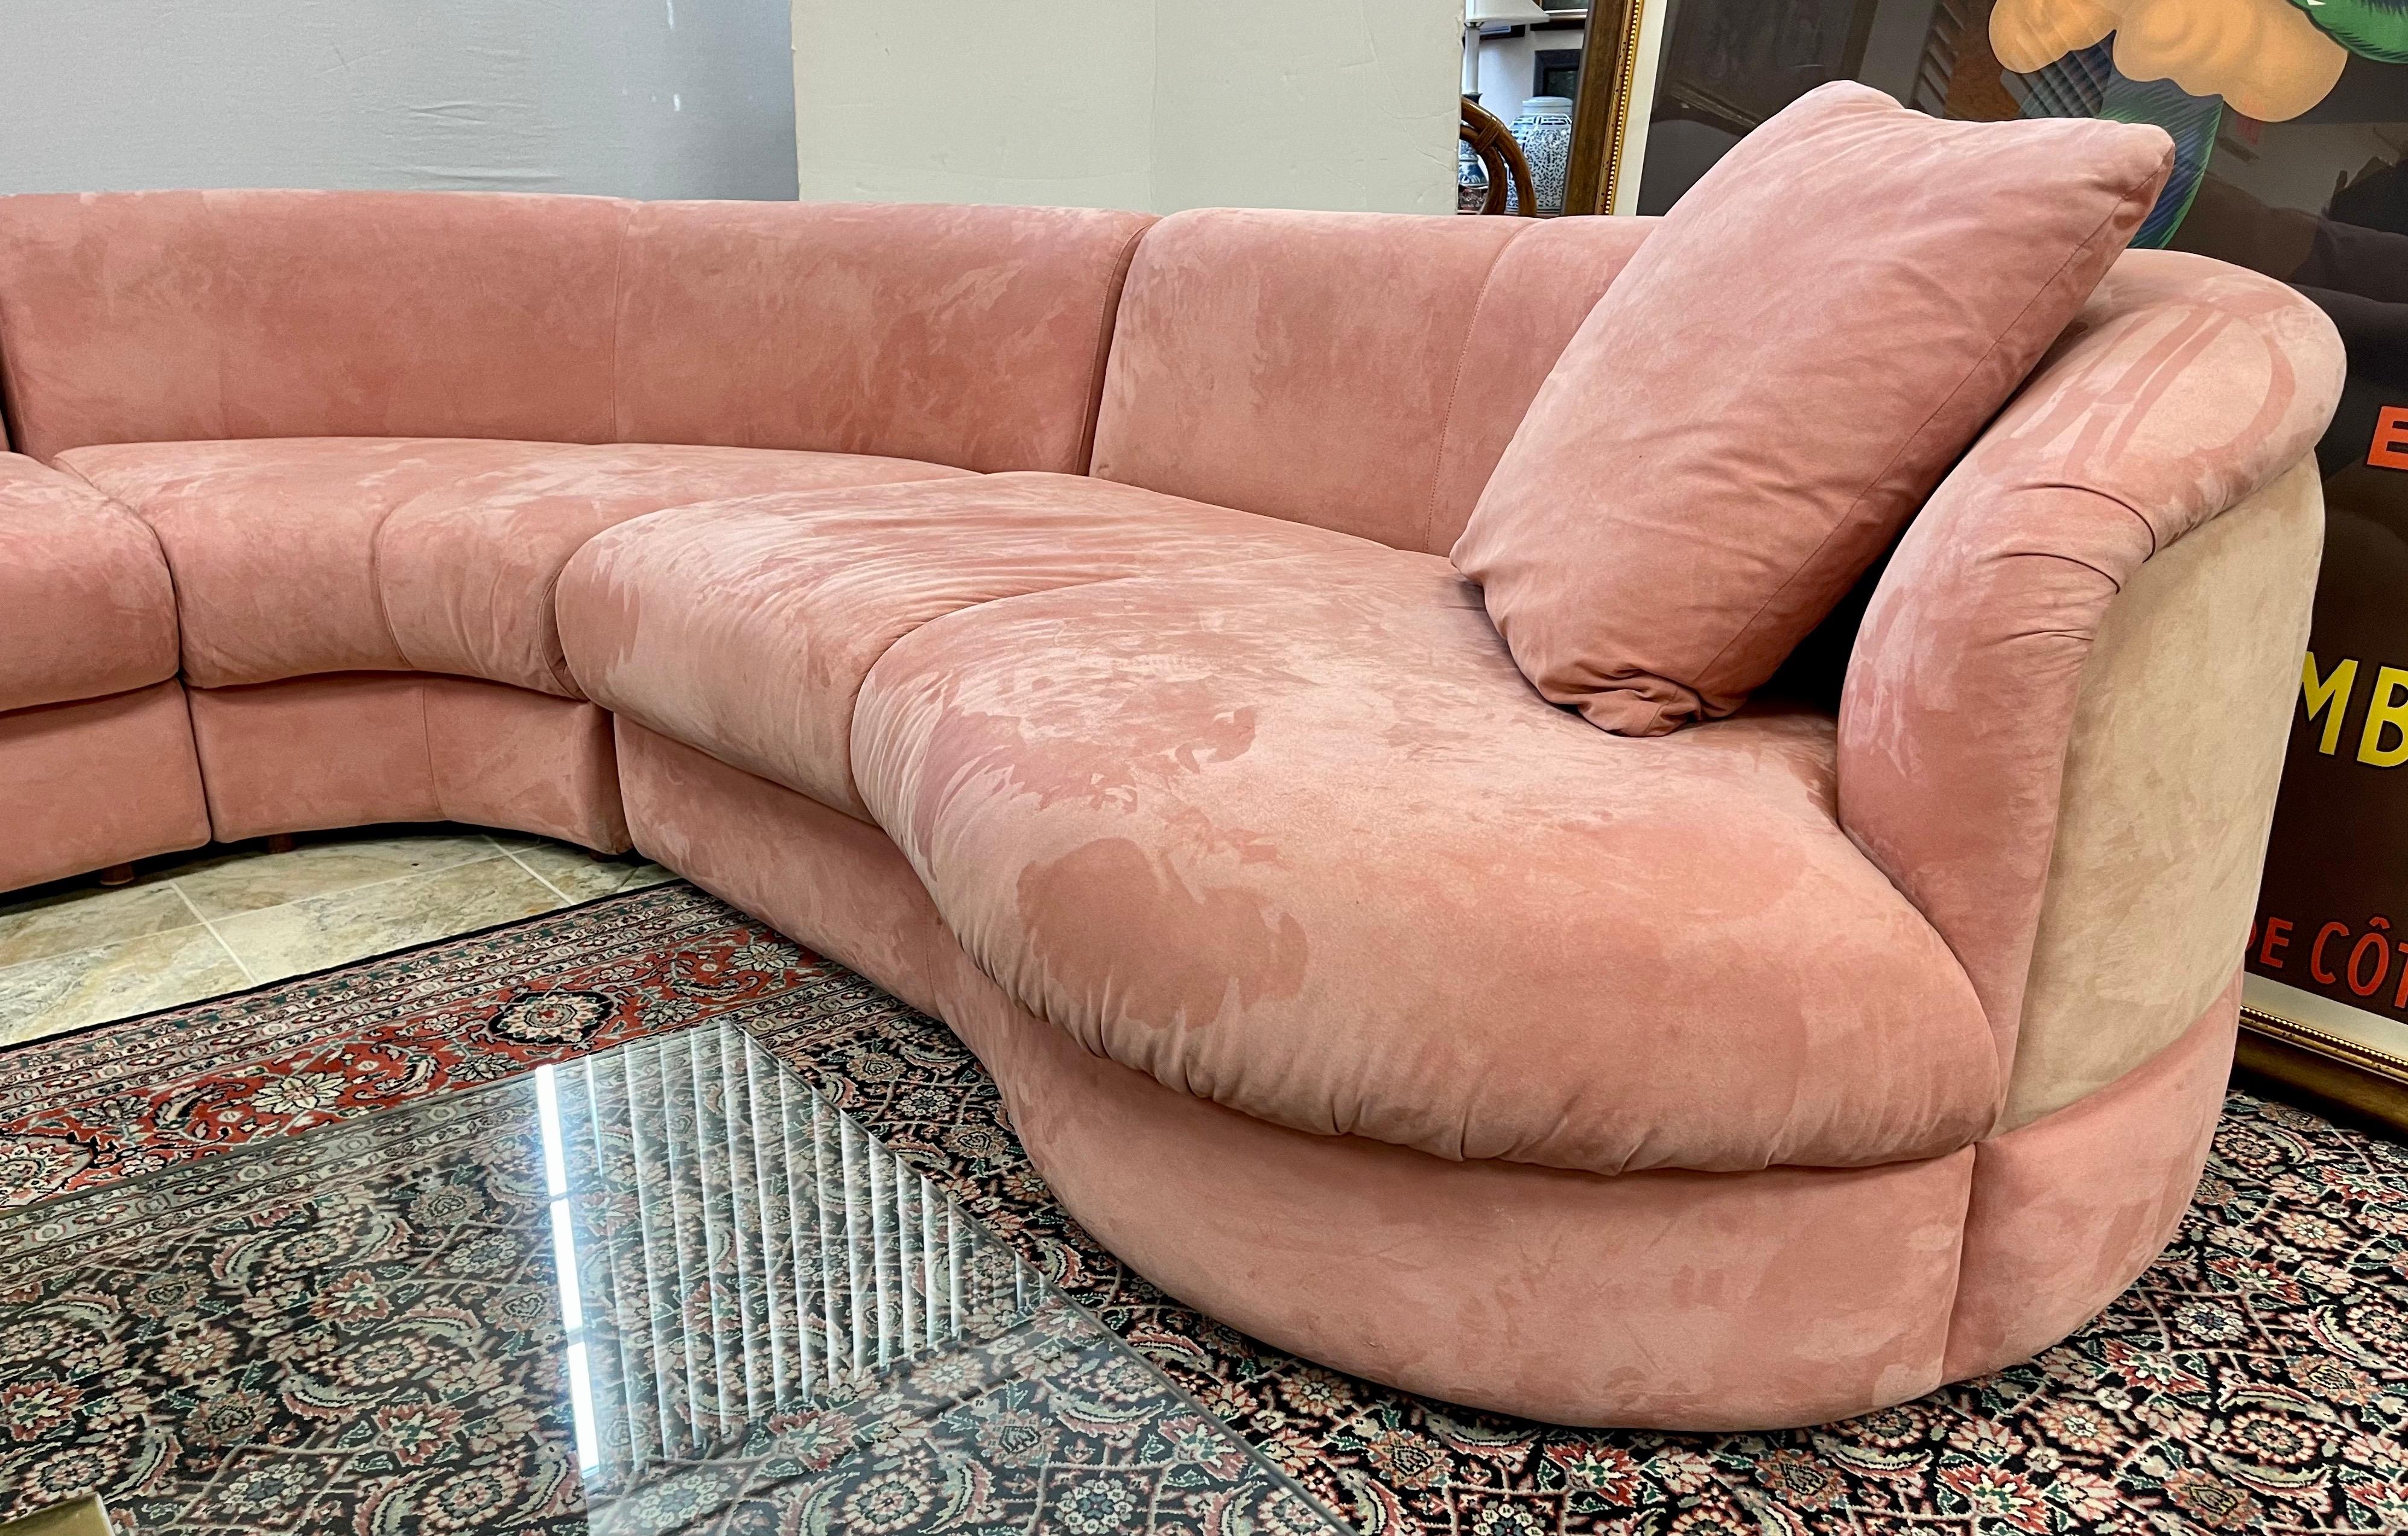 Elegant three piece sectional sofa from Directional Furniture, circa late 1970s-1980s. The fabric is a showstopper - rose colored suede and it features a subtle but stylish two-tone color scheme only on the back, of rose and tan. See all pictures.